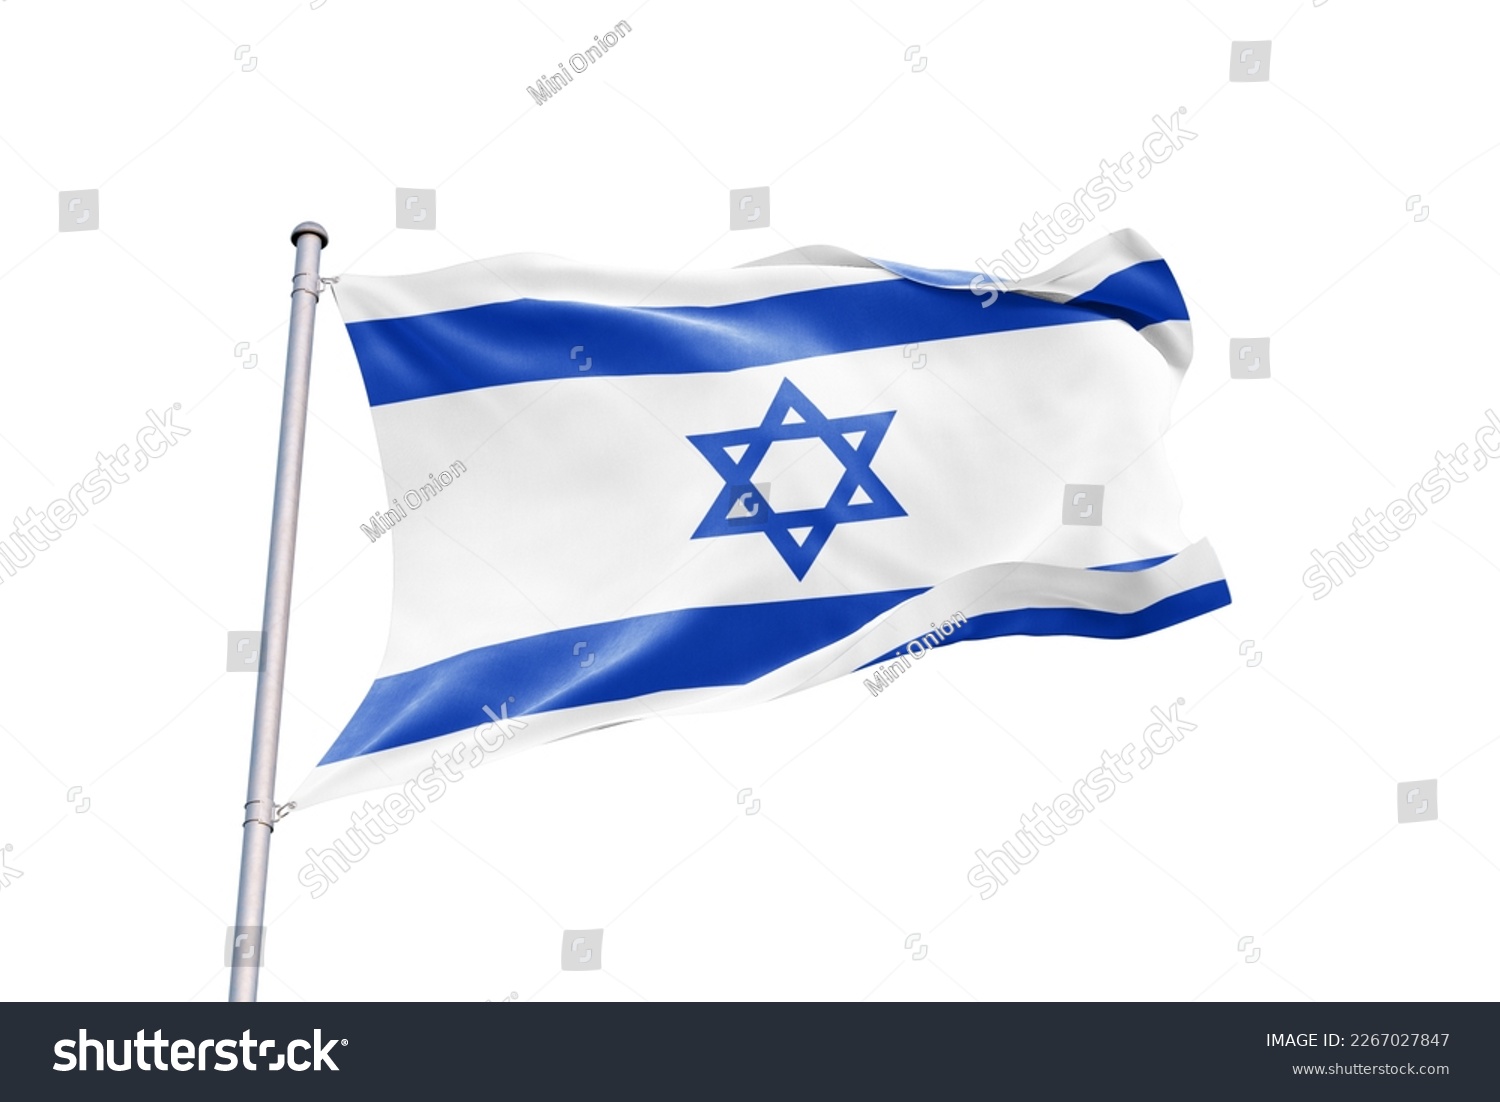 Waving flag of Israel in white background. Israel flag for independence day. The symbol of the state on wavy fabric. #2267027847